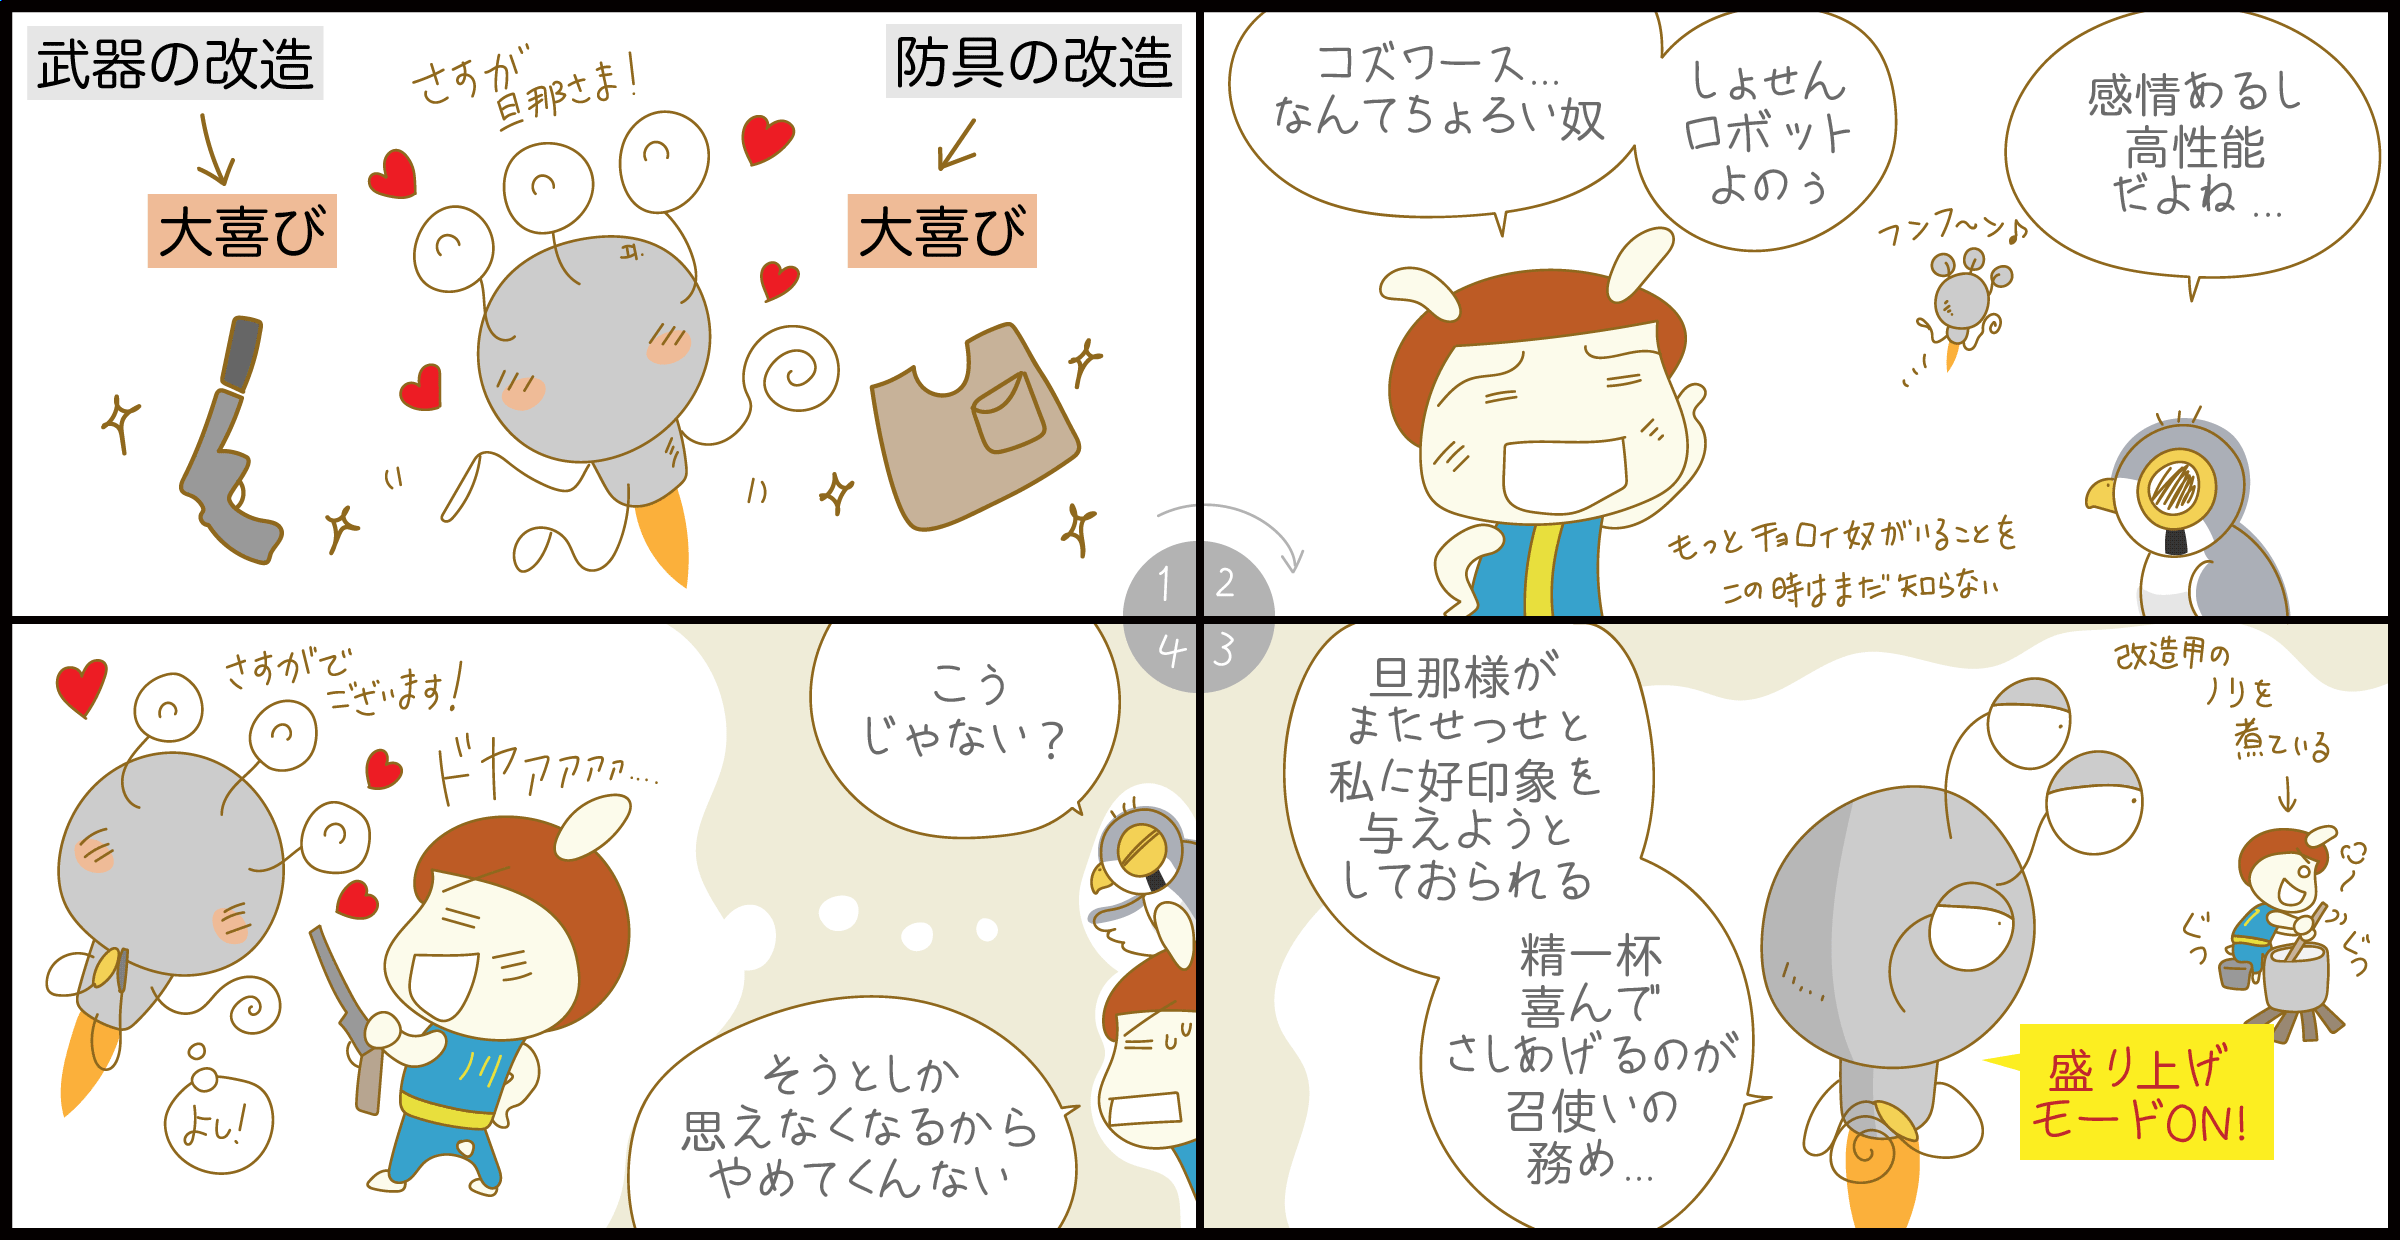 Fallout漫画日記：ちょろい奴コズワース